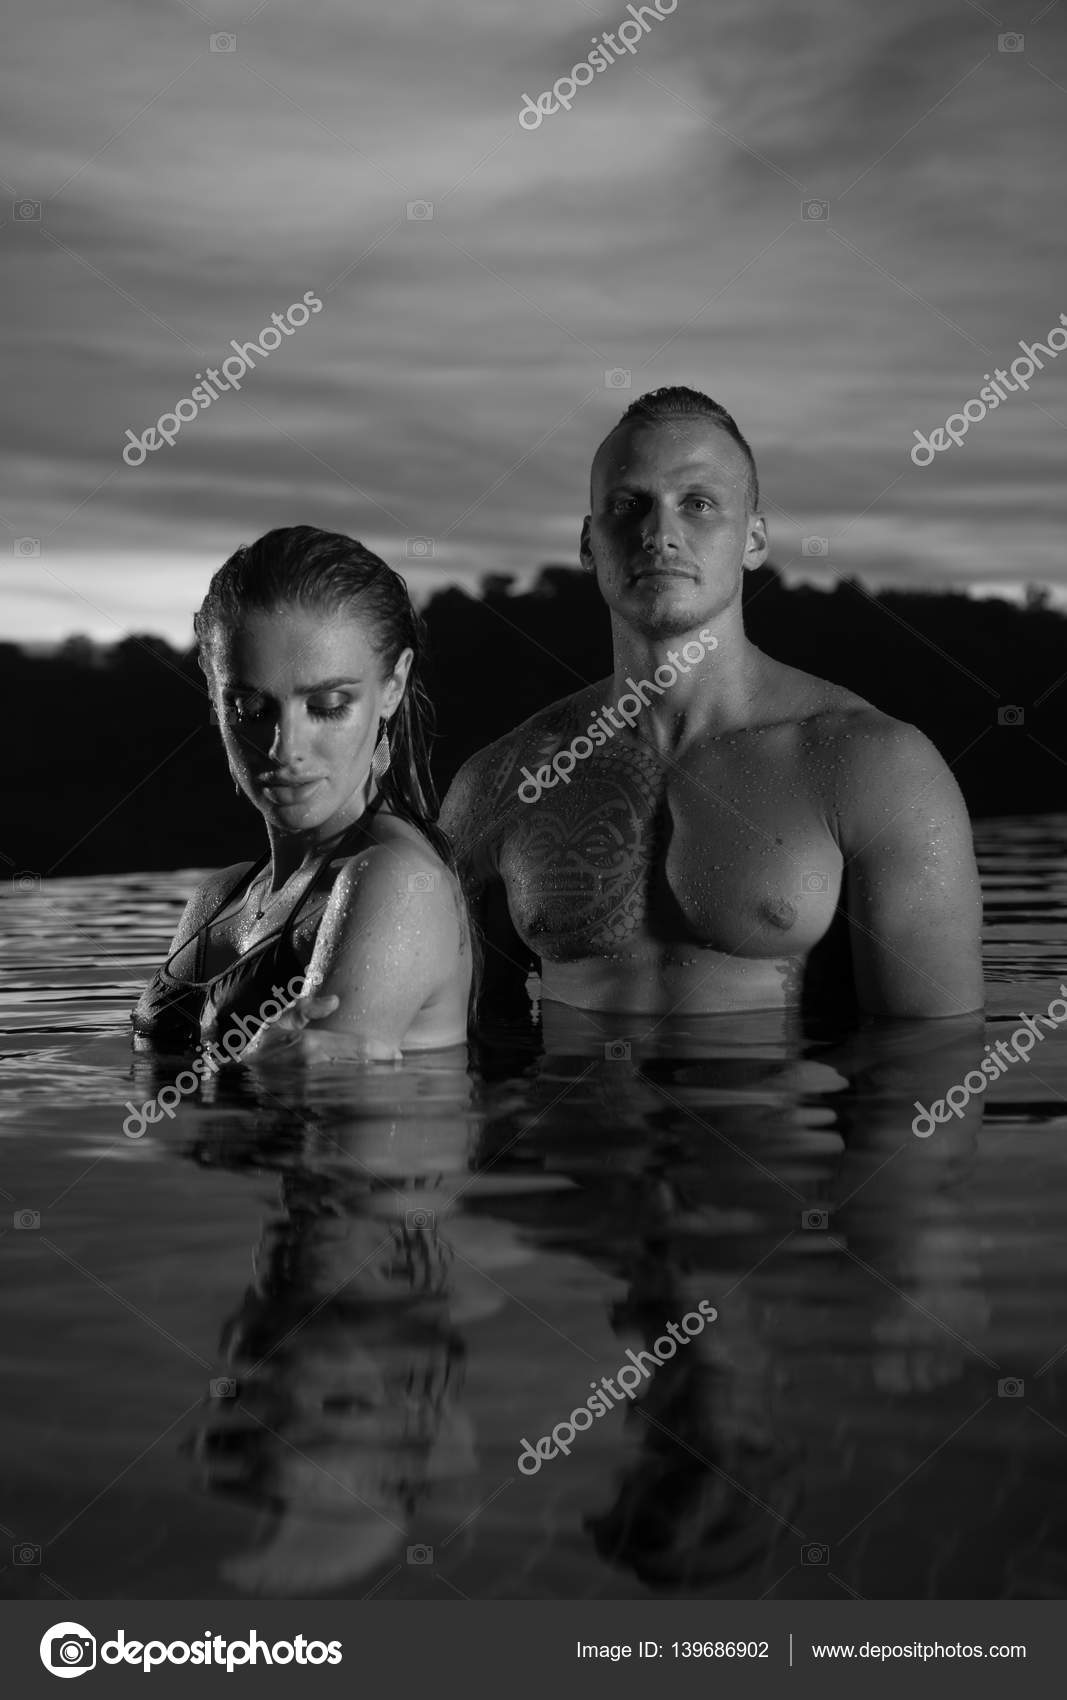 Pin by SEe🤍 on Couples❤️ | Couples, Pool poses, Pool picture